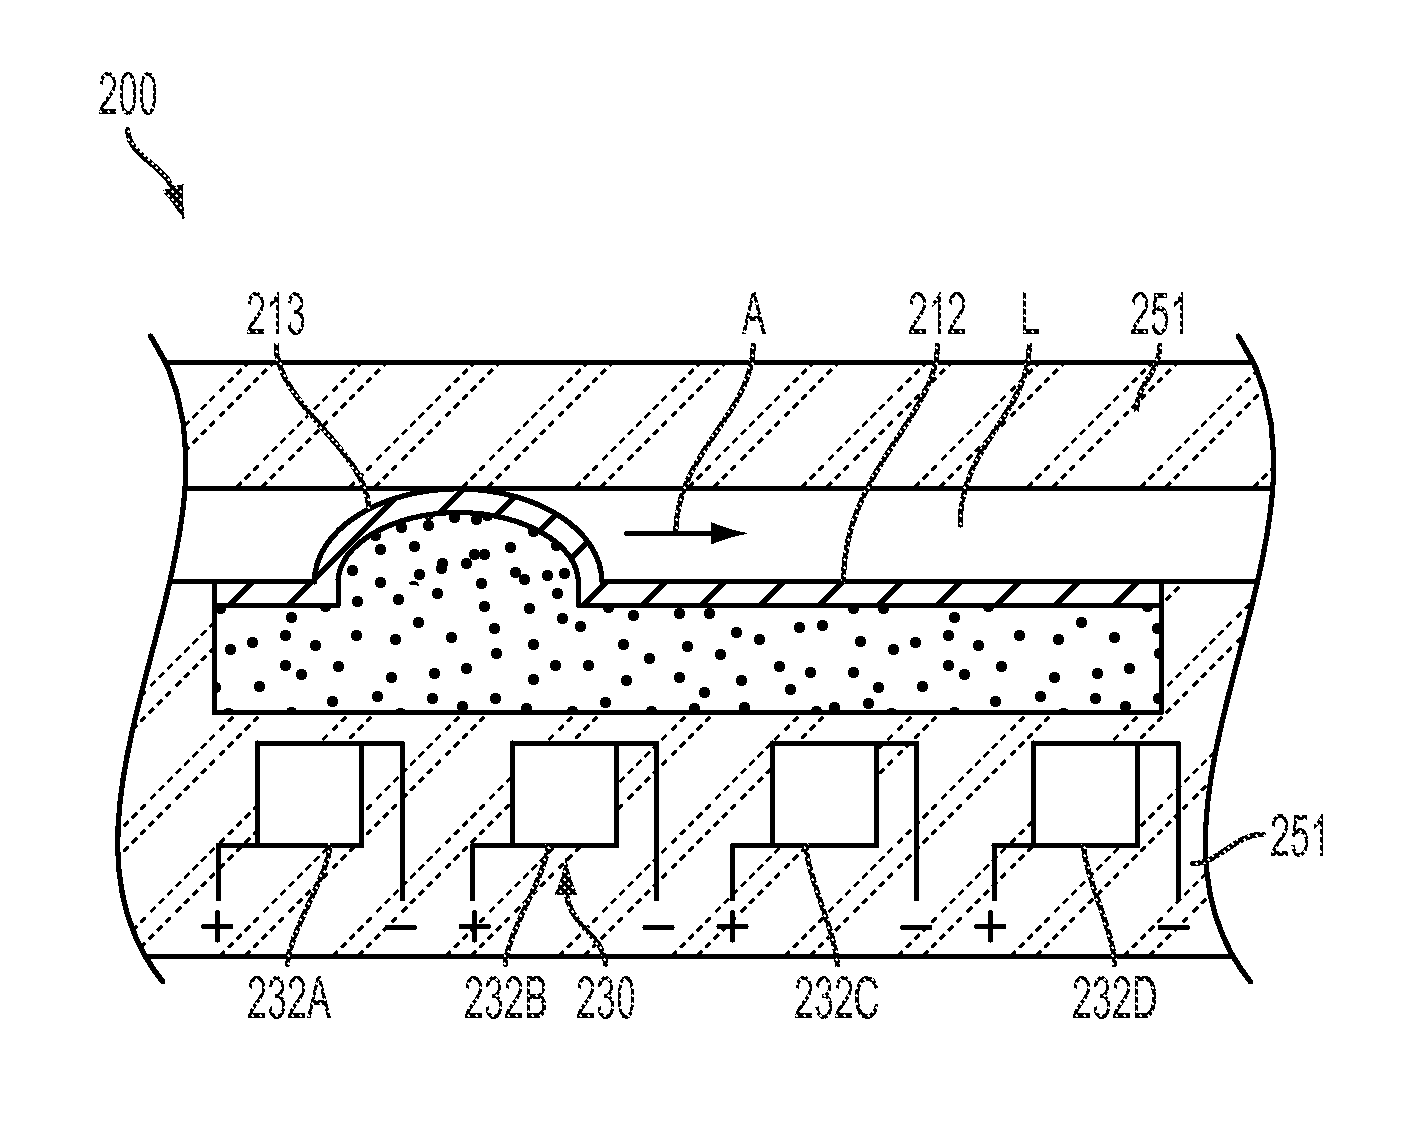 Ferrofluid control and sample collection for microfluidic application